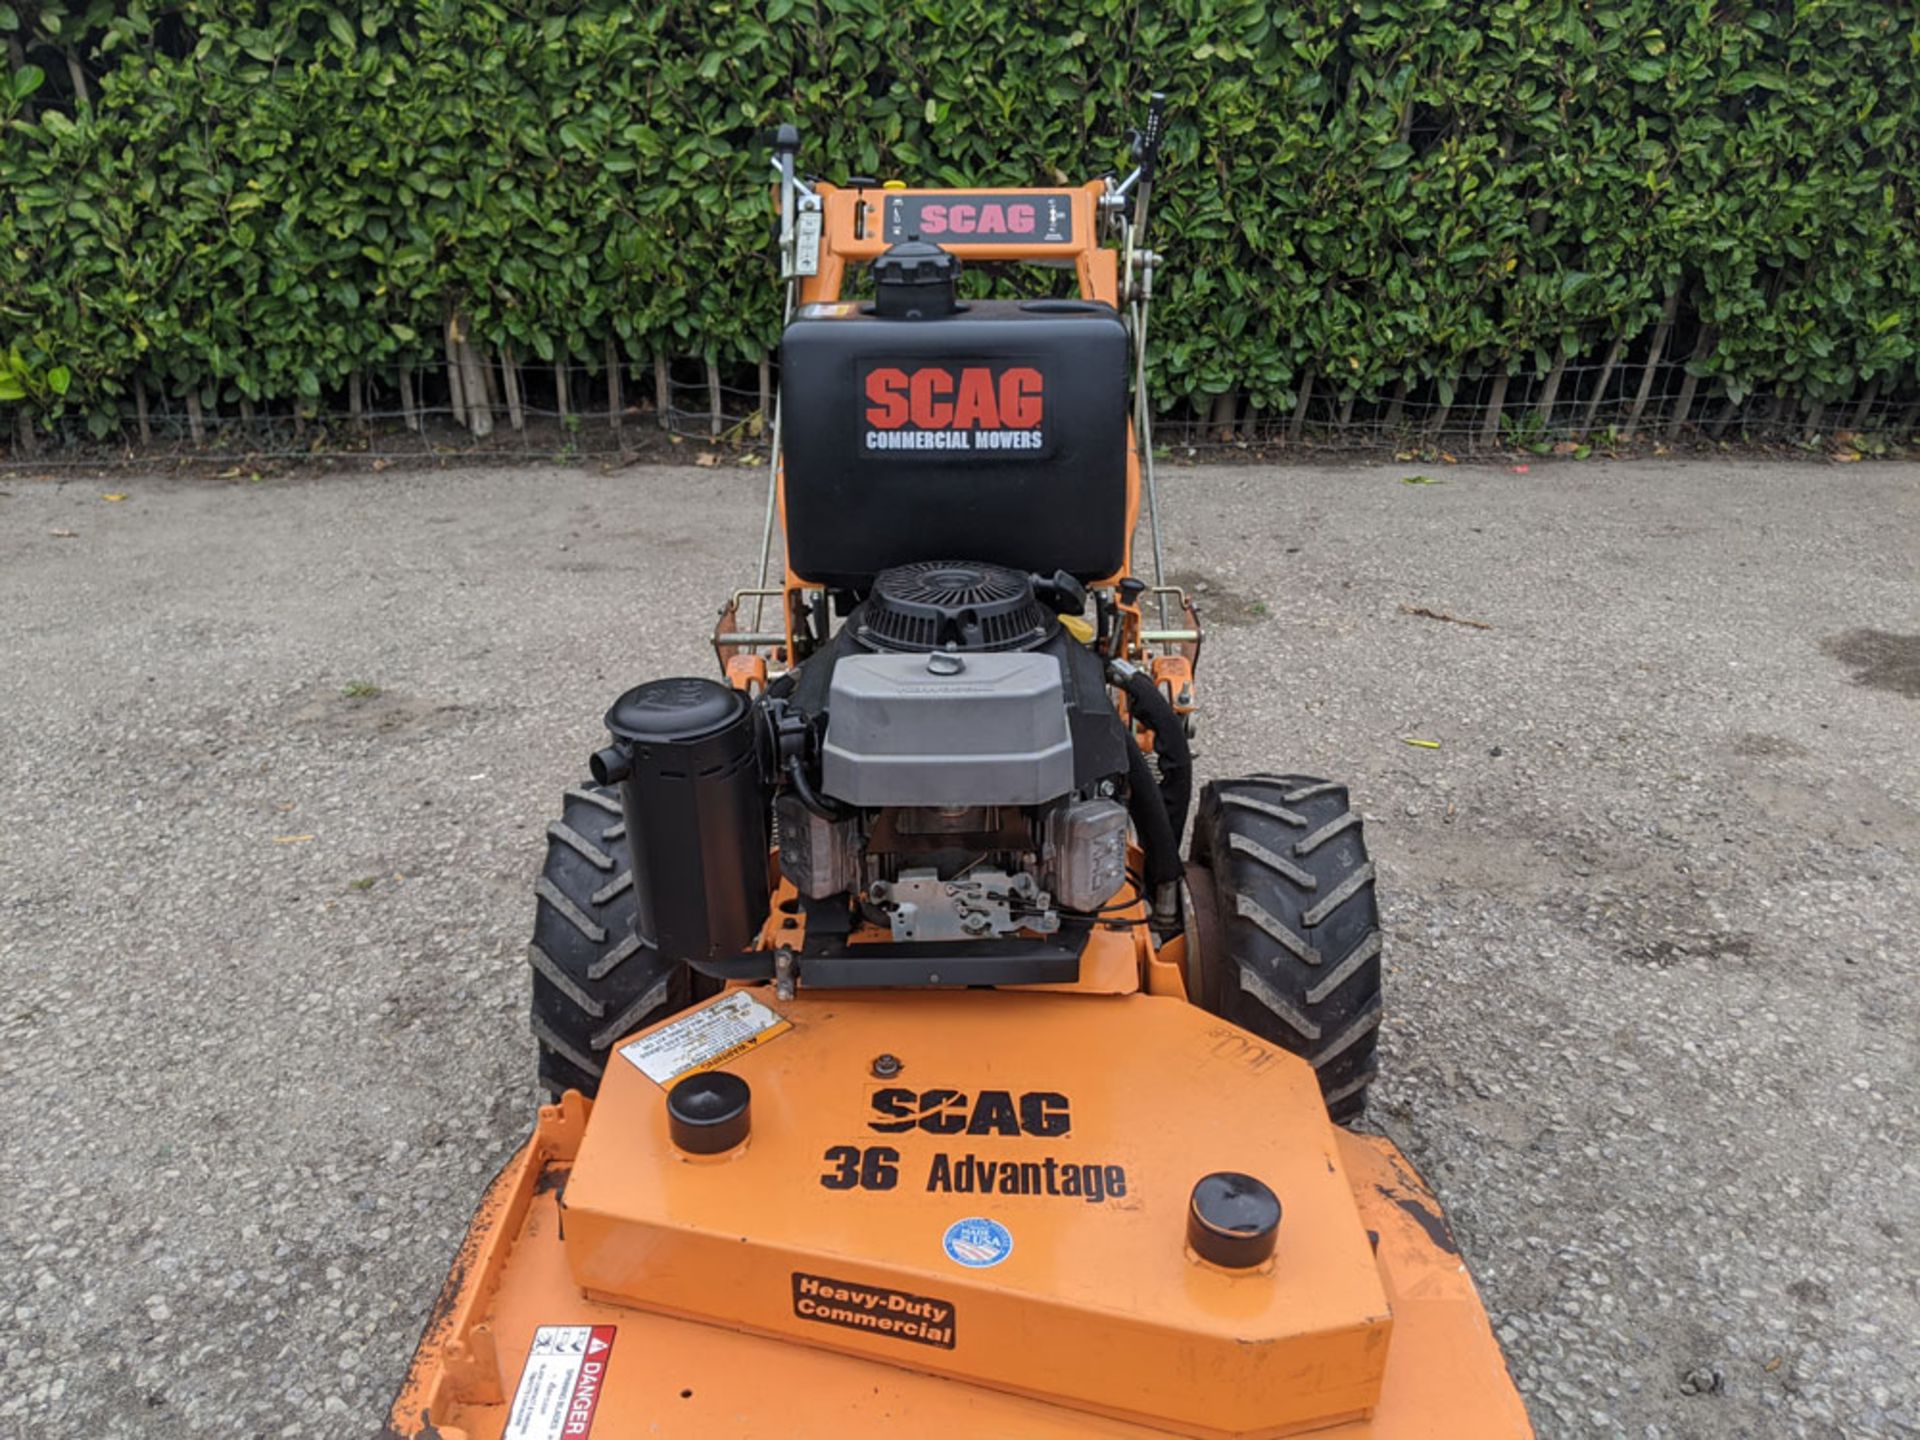 2008 Scag SWZ36A-16KAI 36" Commercial Walk Behind Zero Turn Rotary Mower - Image 3 of 7